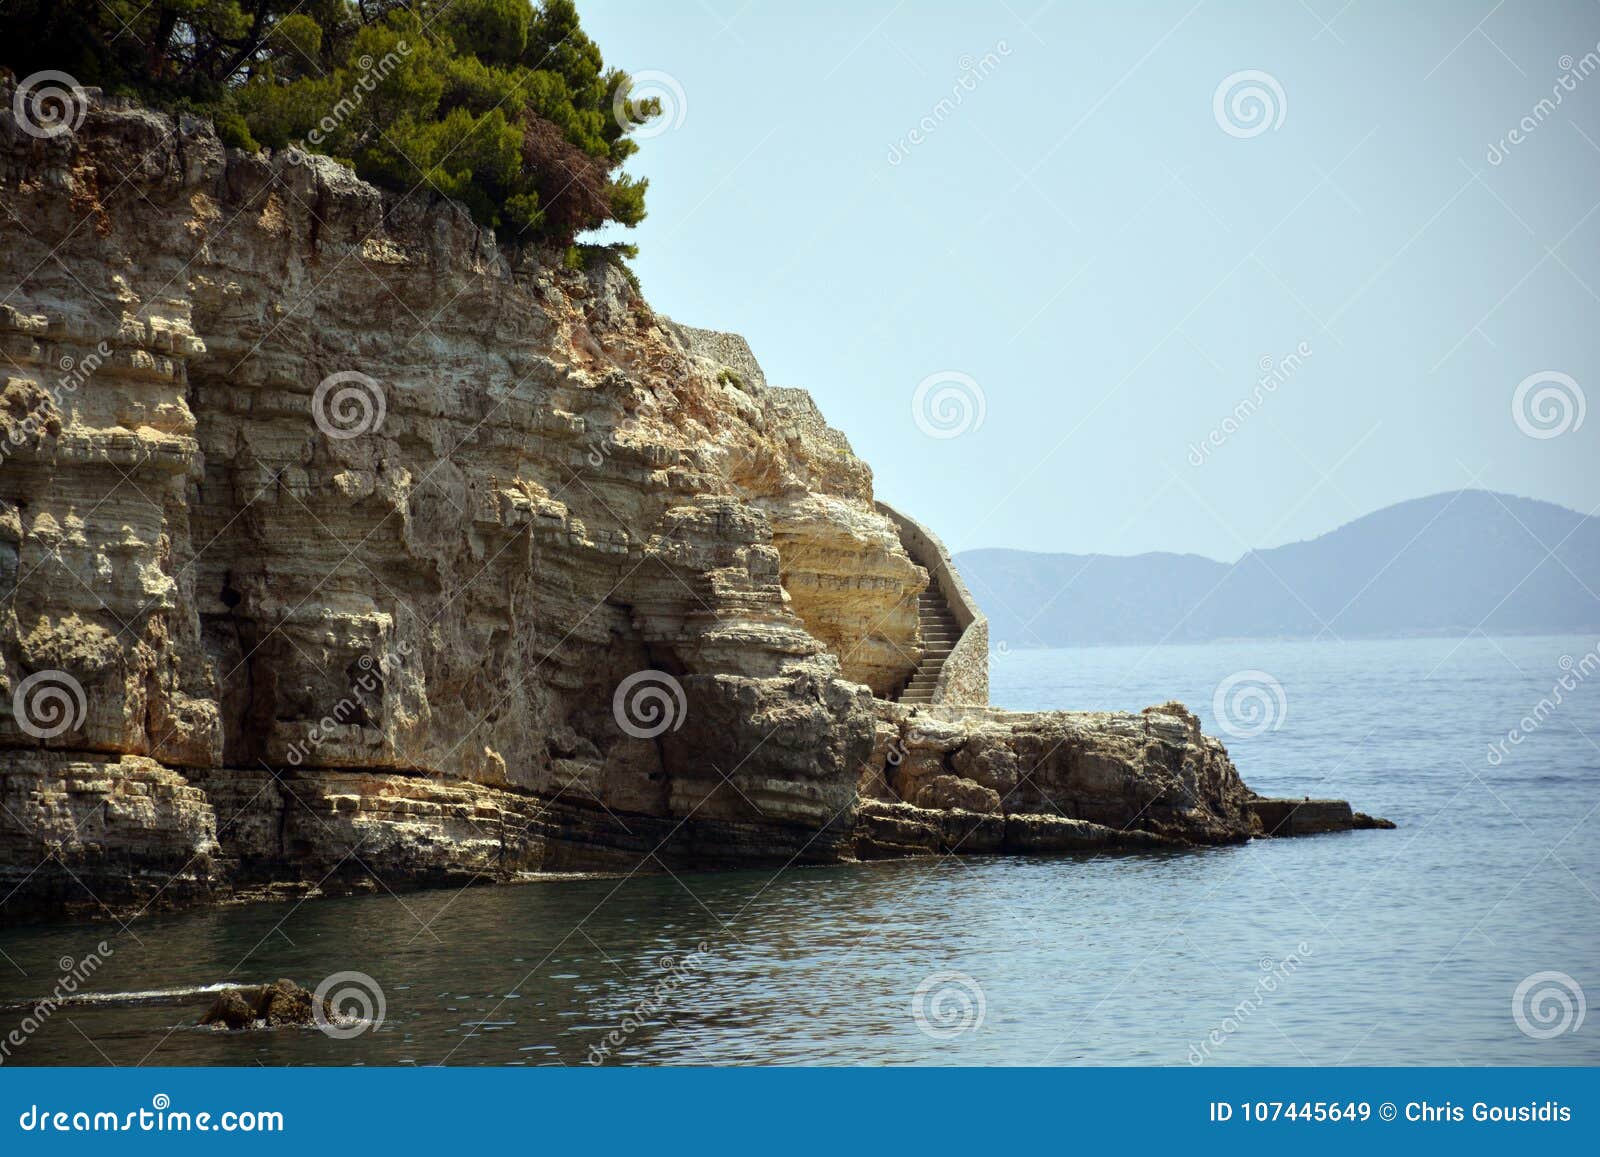 Curved Stairs into the Greek Sea. Stock Image - Image of culture ...